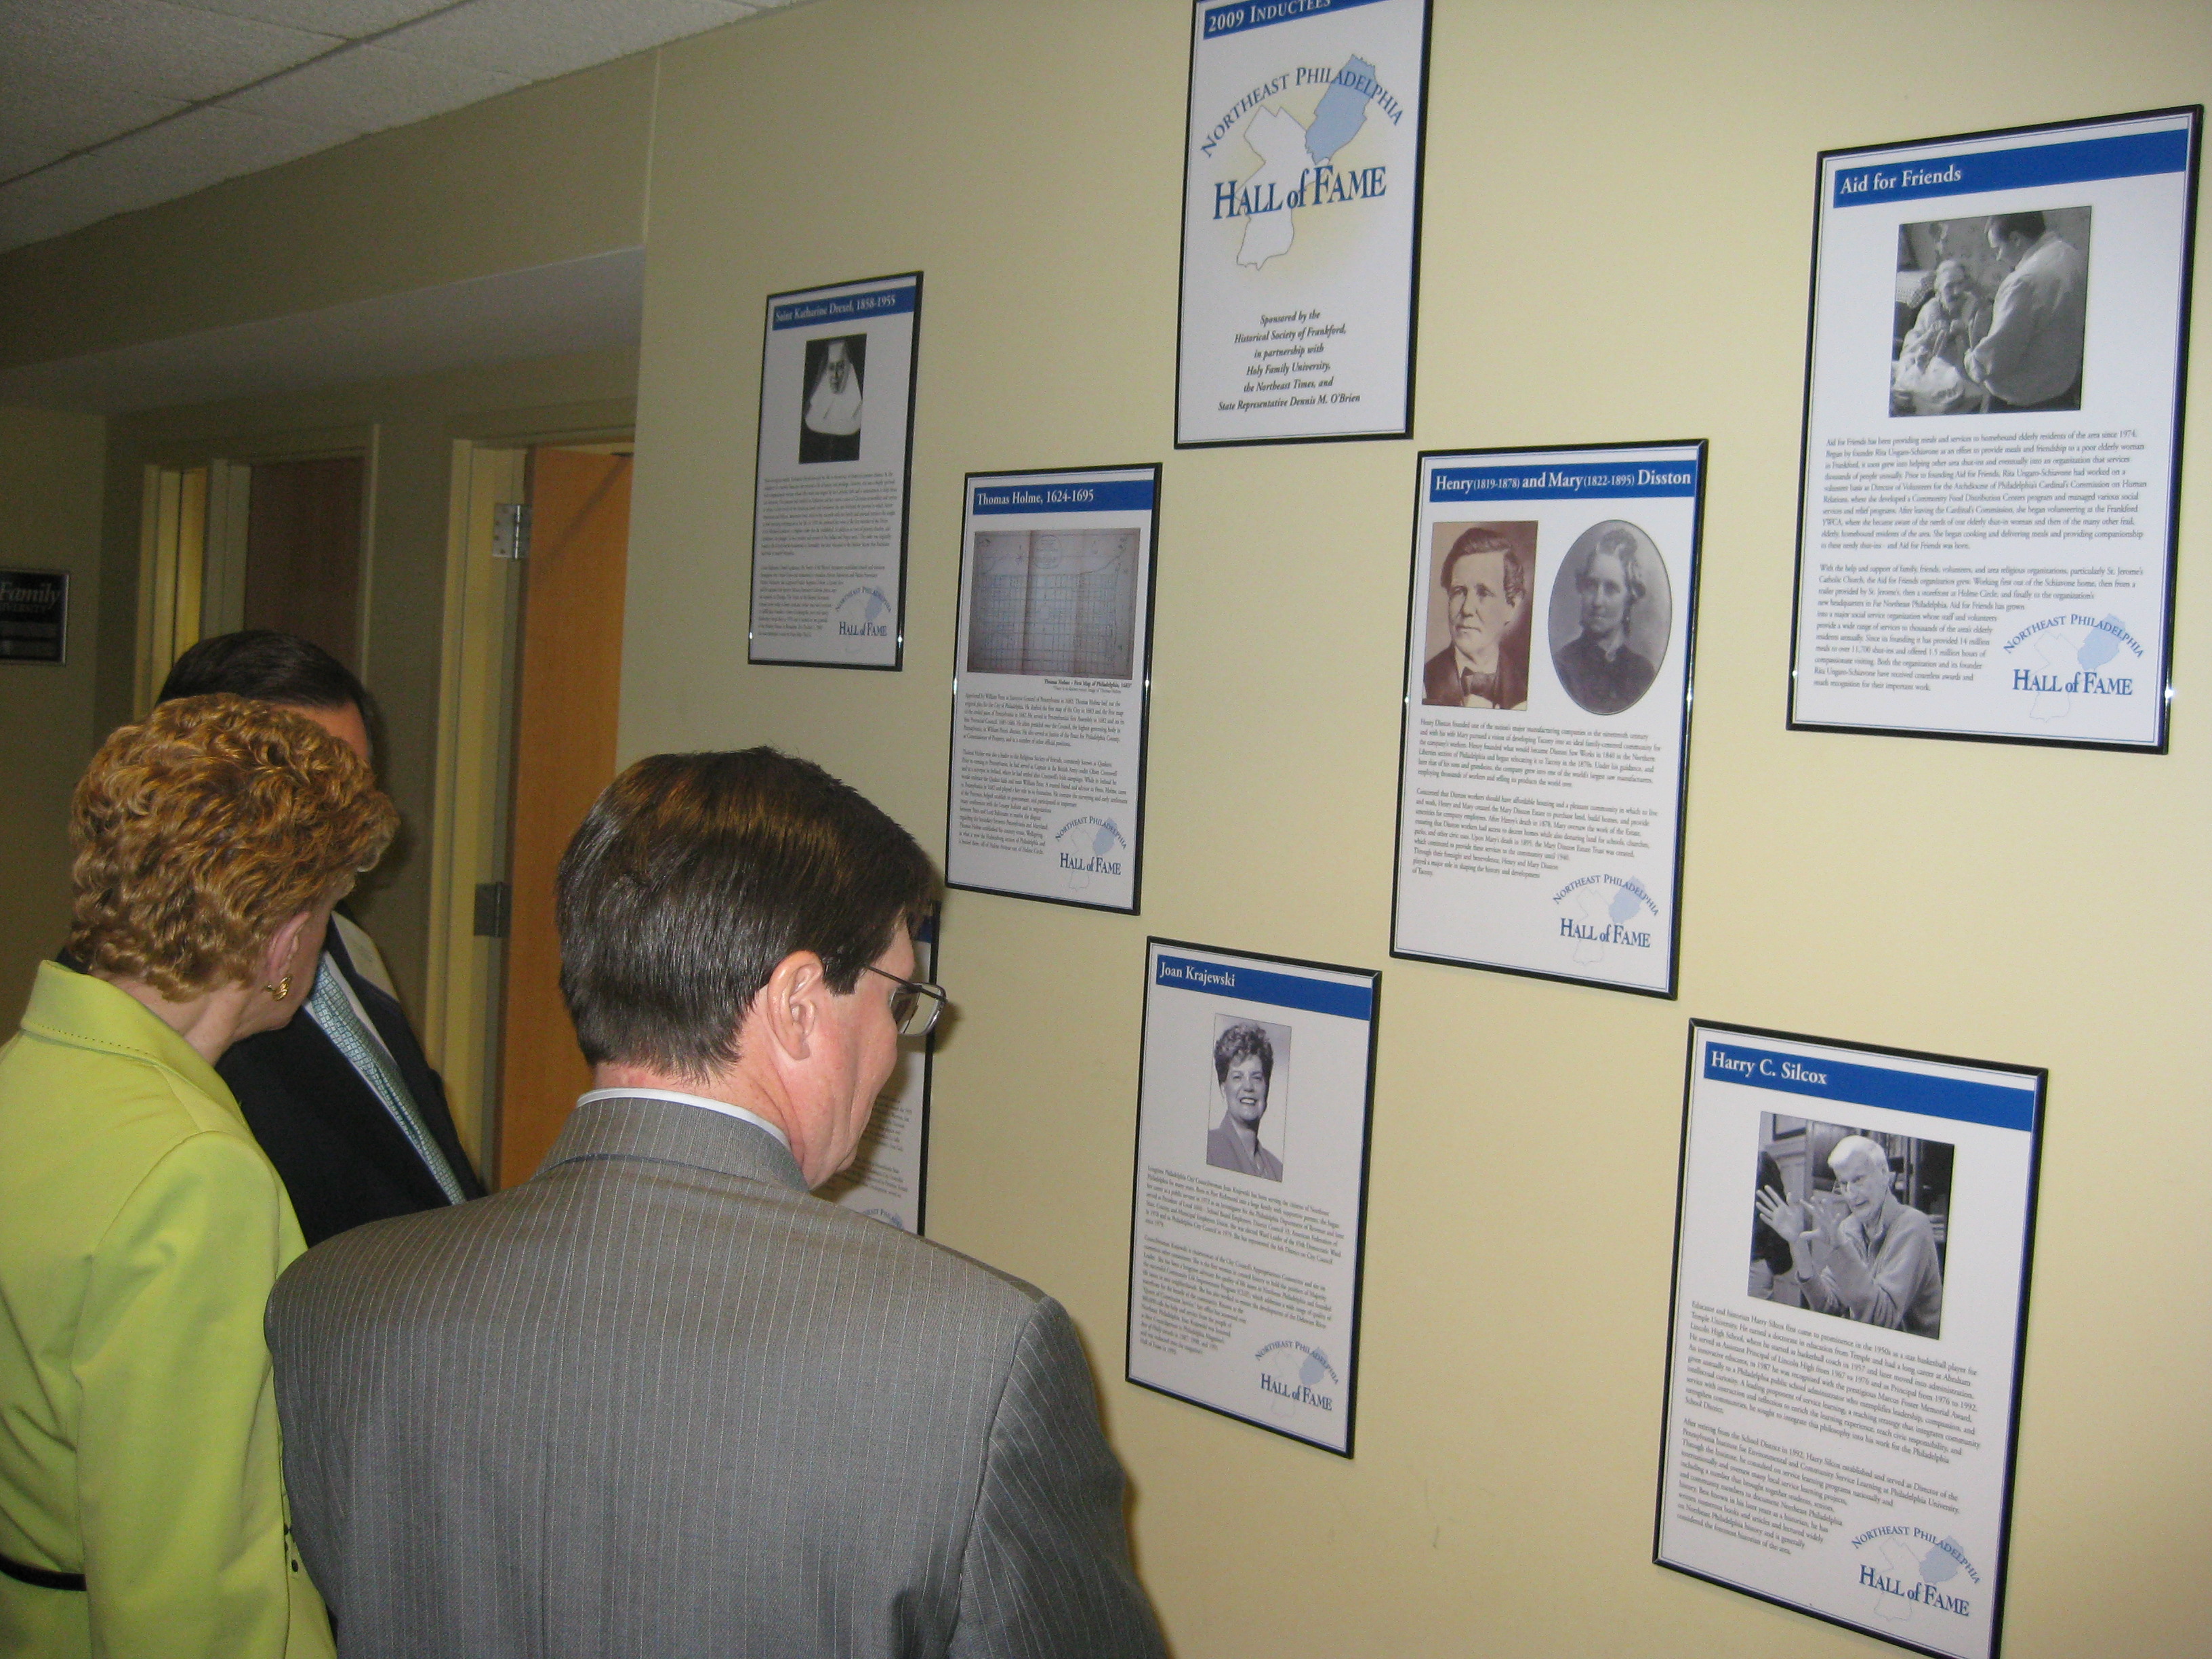 City Councilwoman Joan Krajewski (l) examines the wall of inductees to the Northeast Philadelphia Hall of Fame. Photo by Christopher Wink.